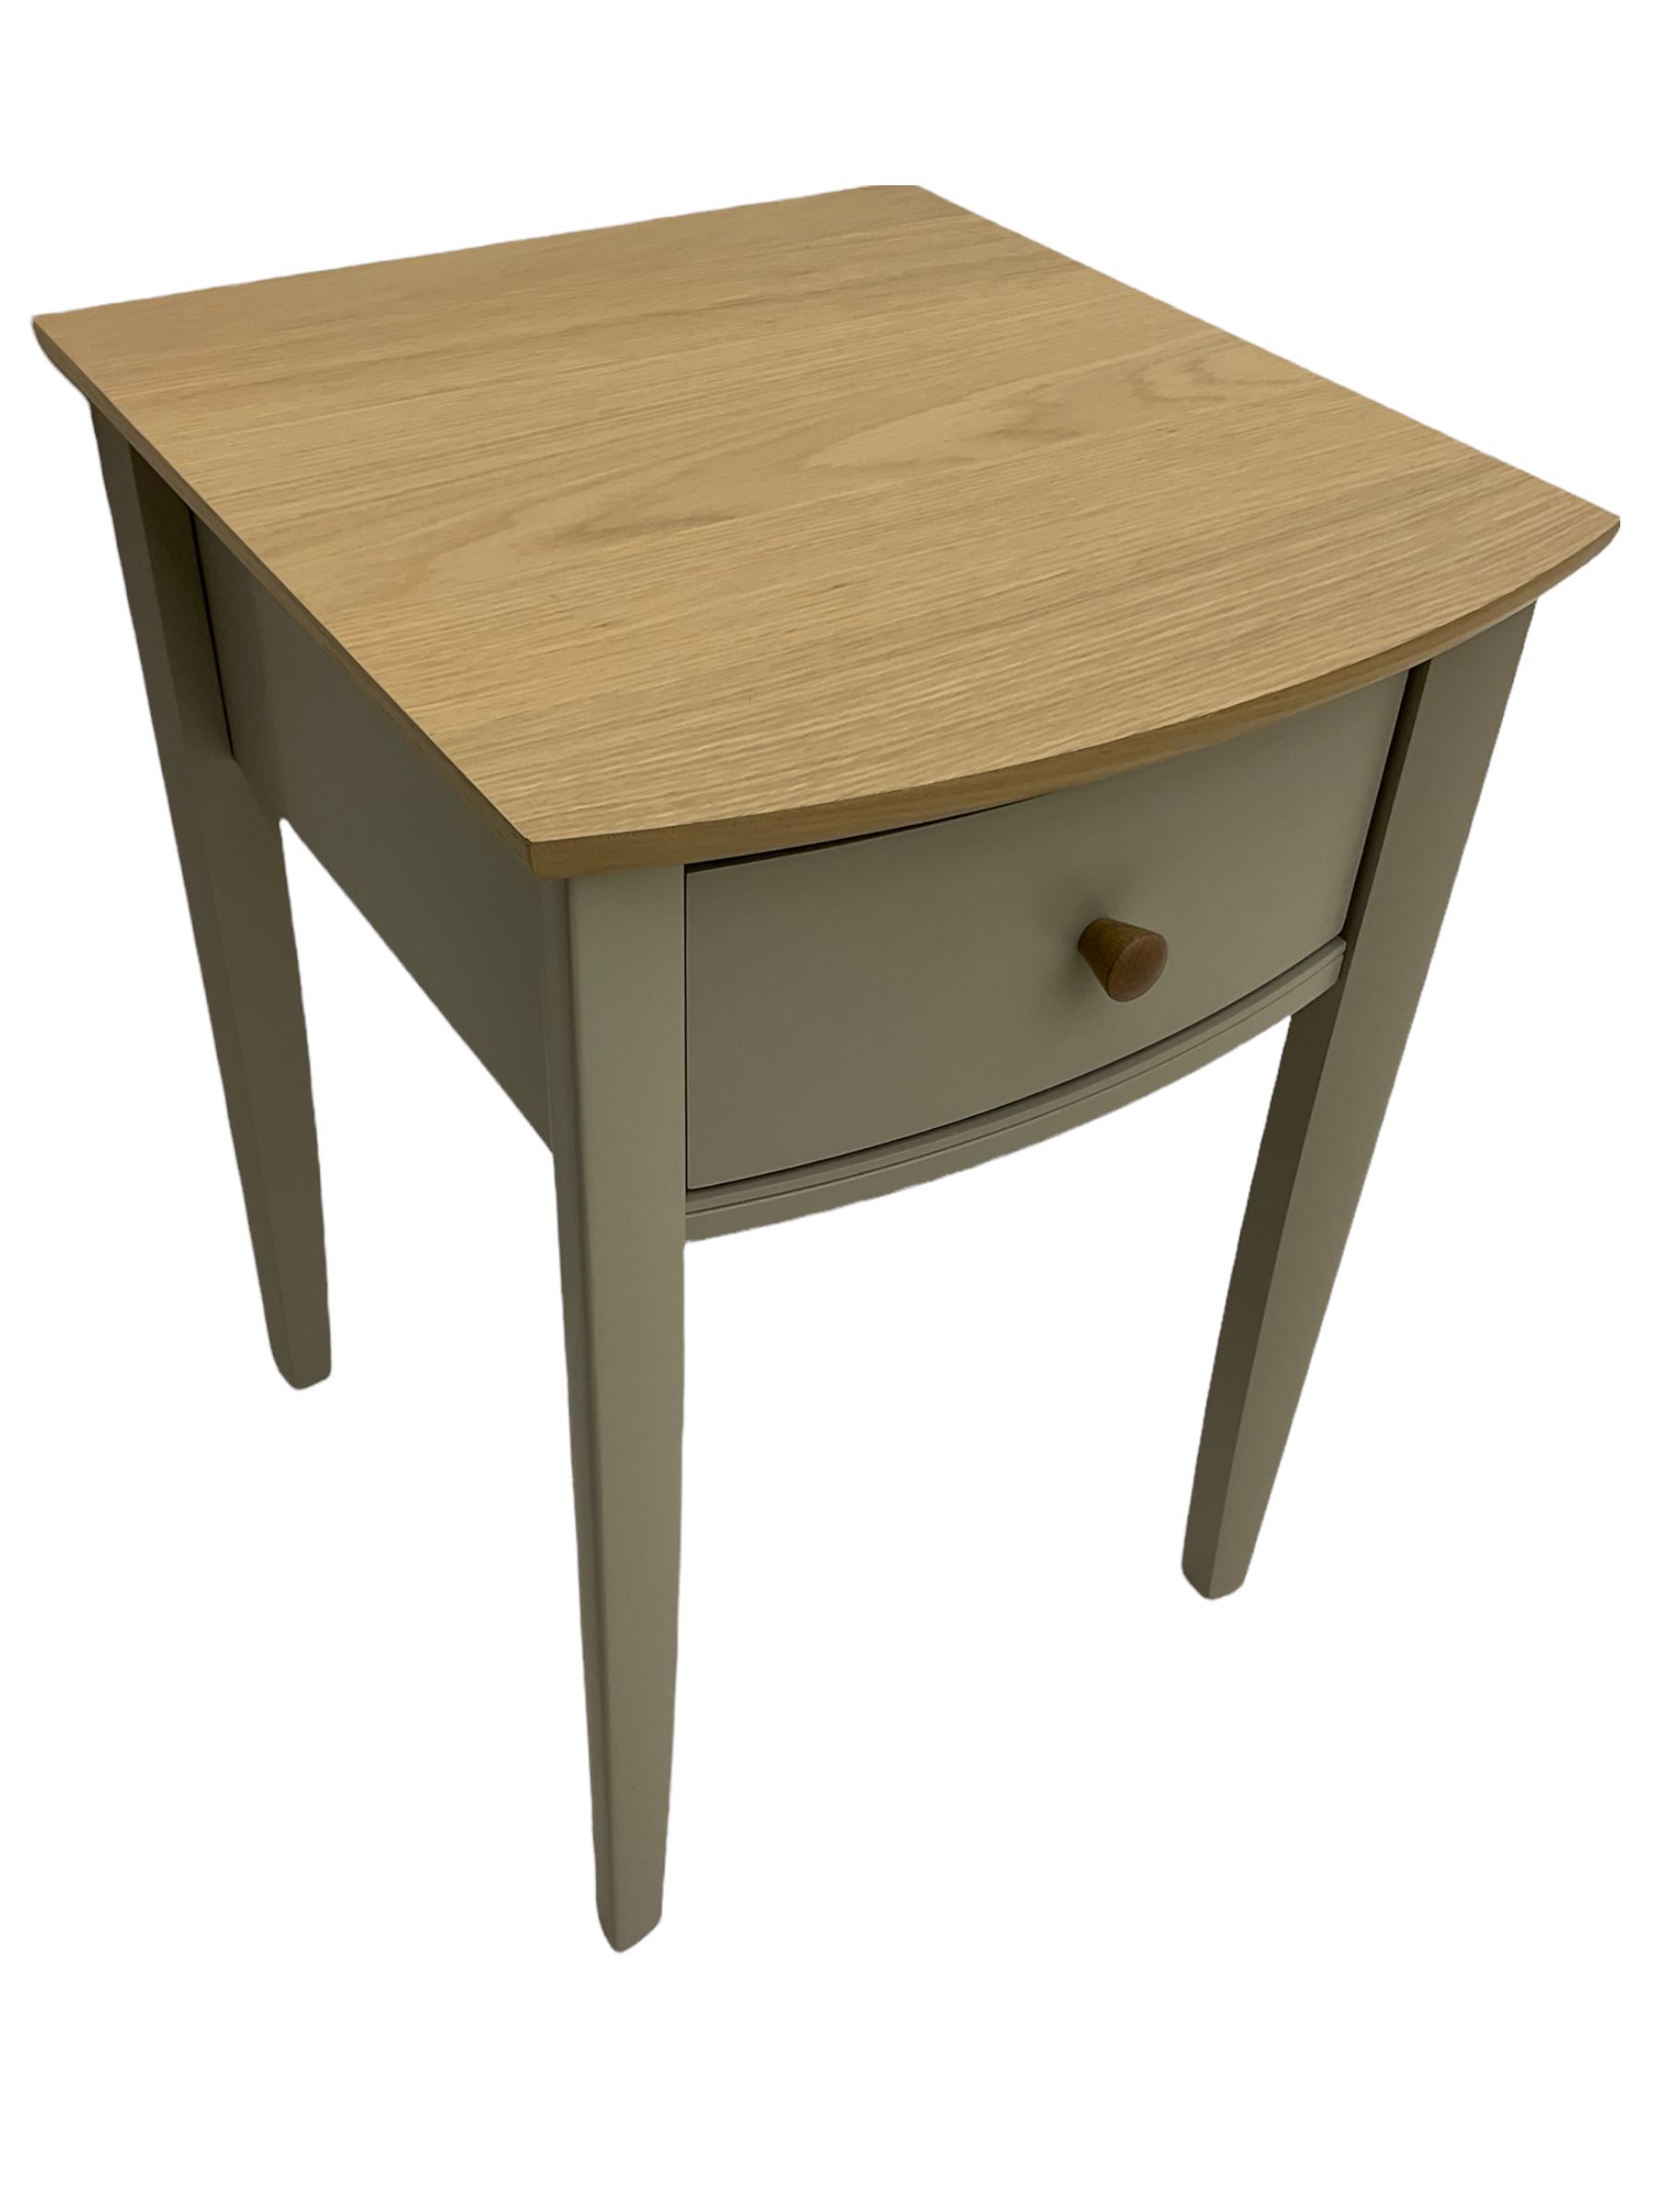 Pair of grey and oak finish bedside lamp tables - Image 4 of 4